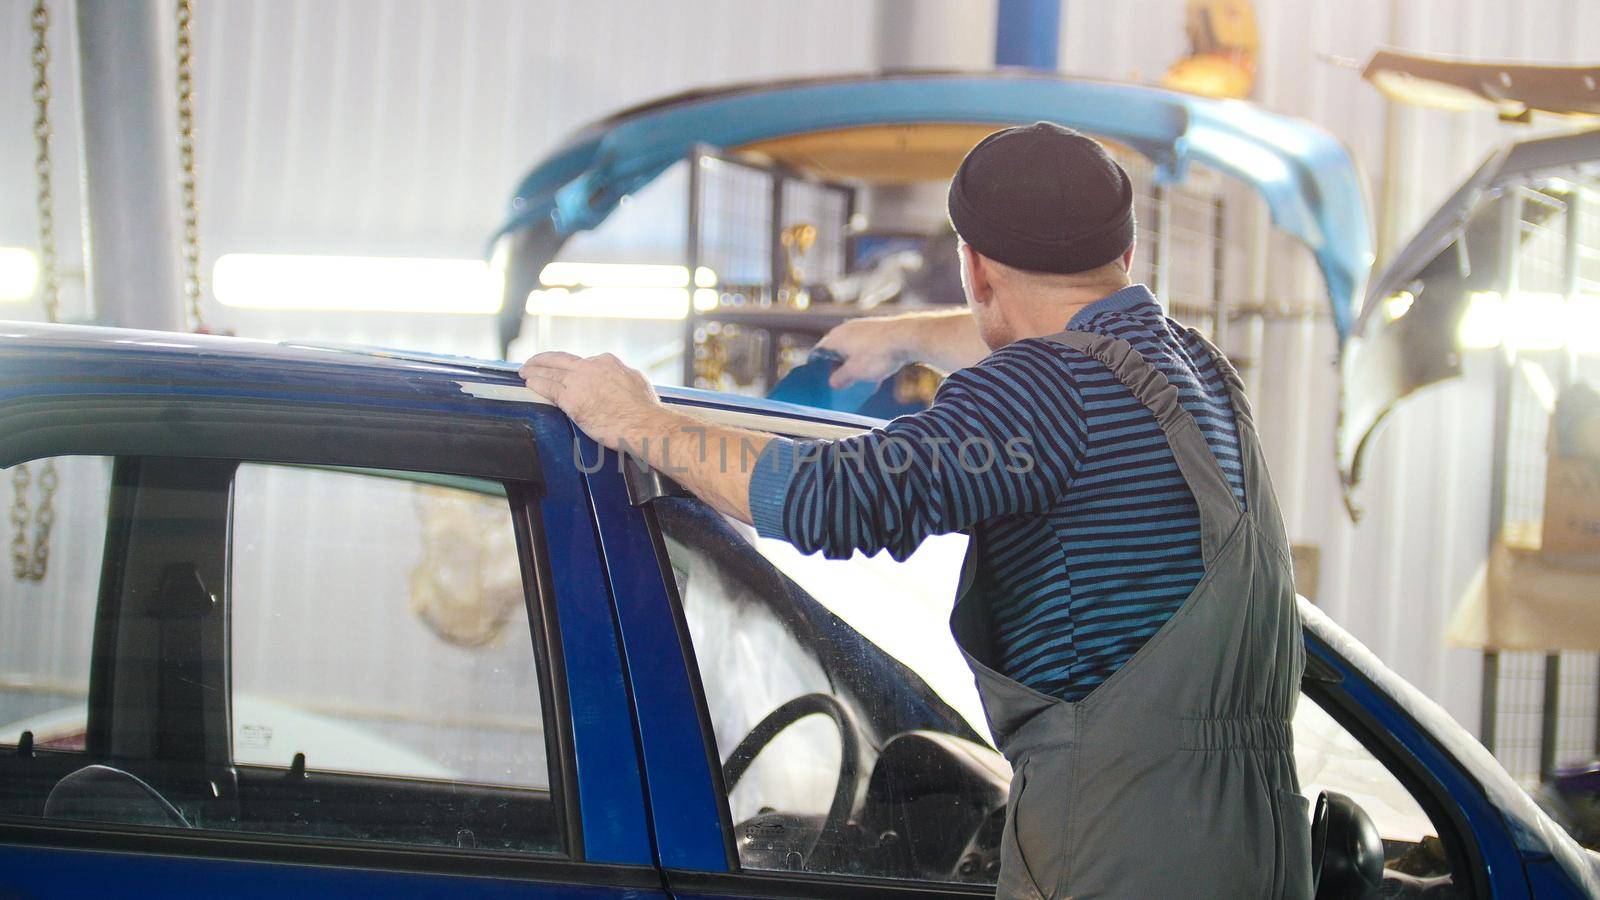 Professional car service - a worker polishes blue automobile by Studia72